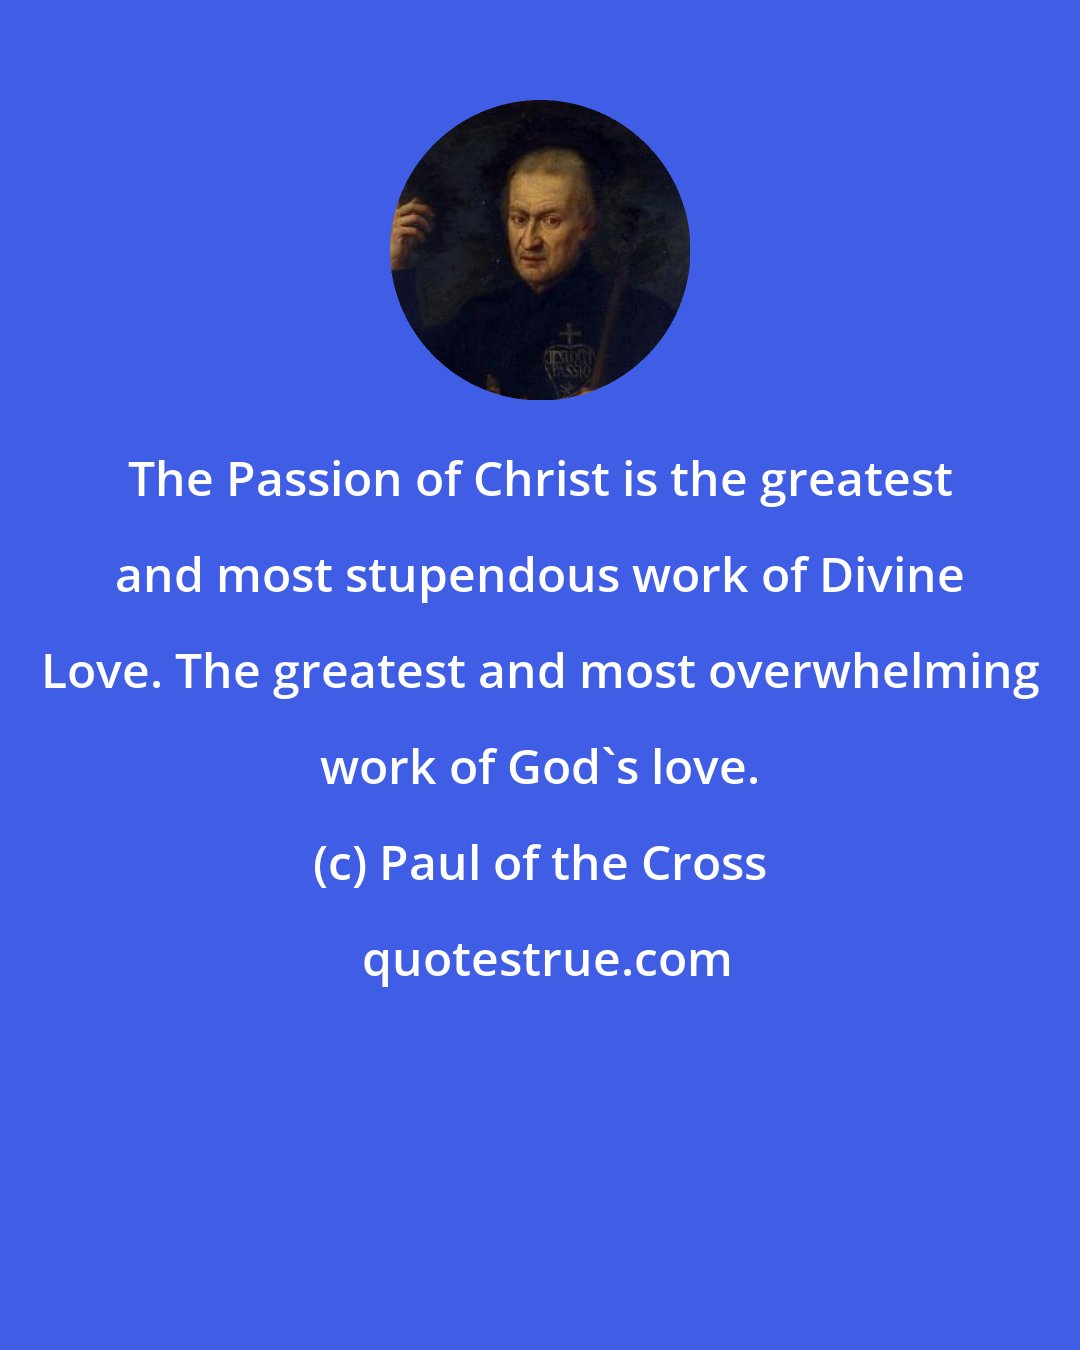 Paul of the Cross: The Passion of Christ is the greatest and most stupendous work of Divine Love. The greatest and most overwhelming work of God's love.